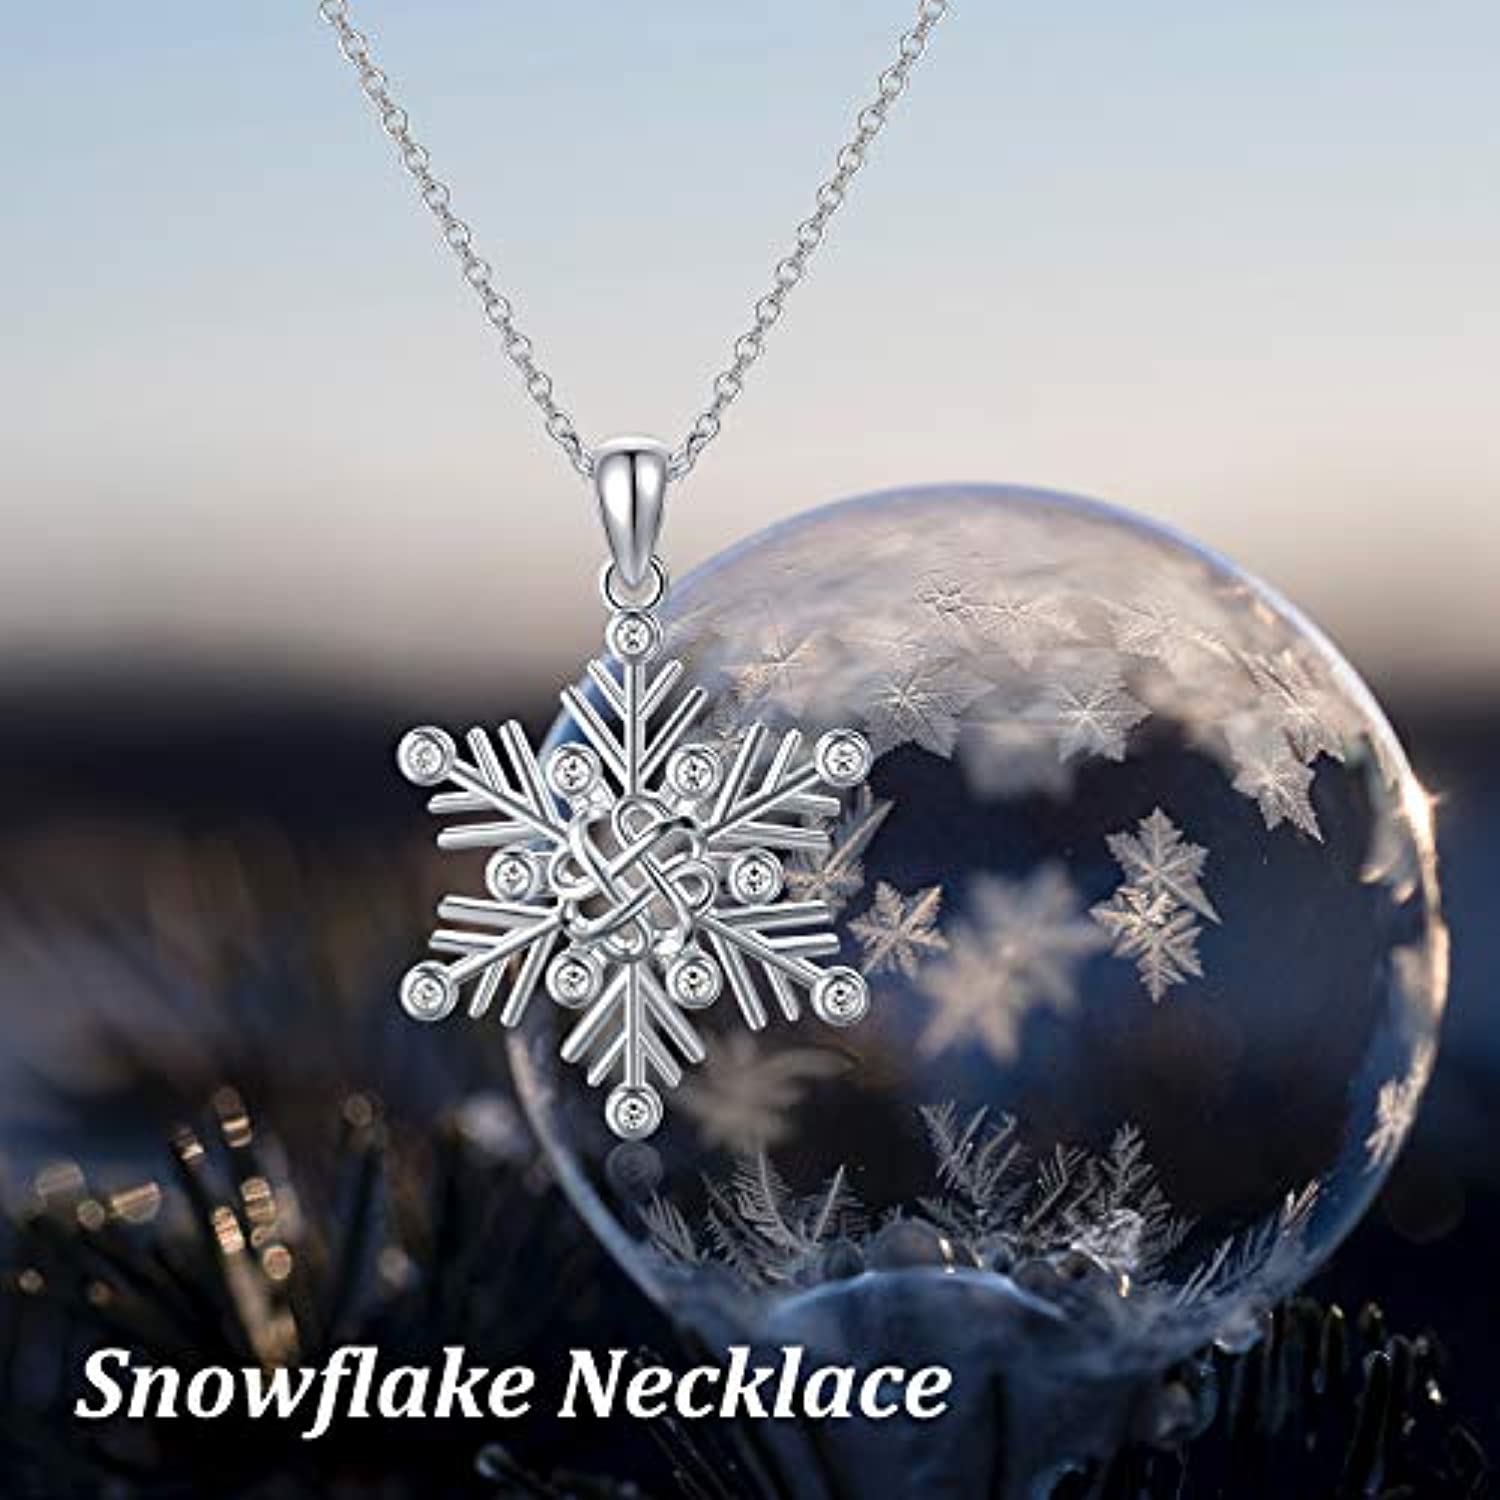 Minimal Snowflake Necklace Christmas Gift Silver Chain & CZ Stones | JFW | Snowflake  necklace, Valentines necklace, Necklace